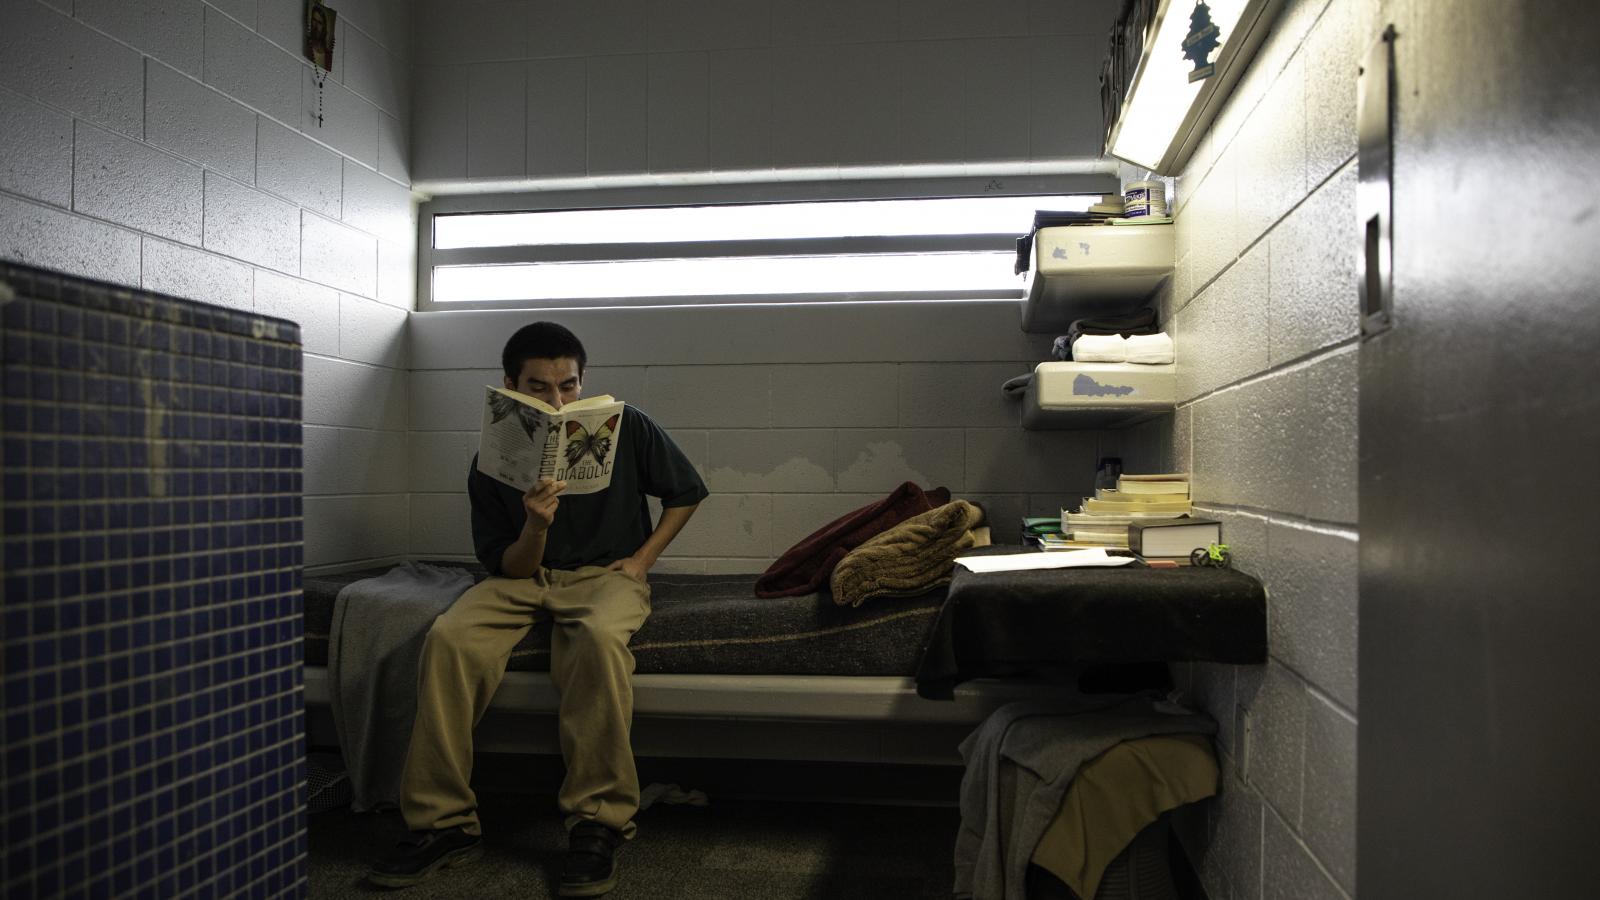 Teenager sitting on a bed in a juvenile facility cell, reading a book